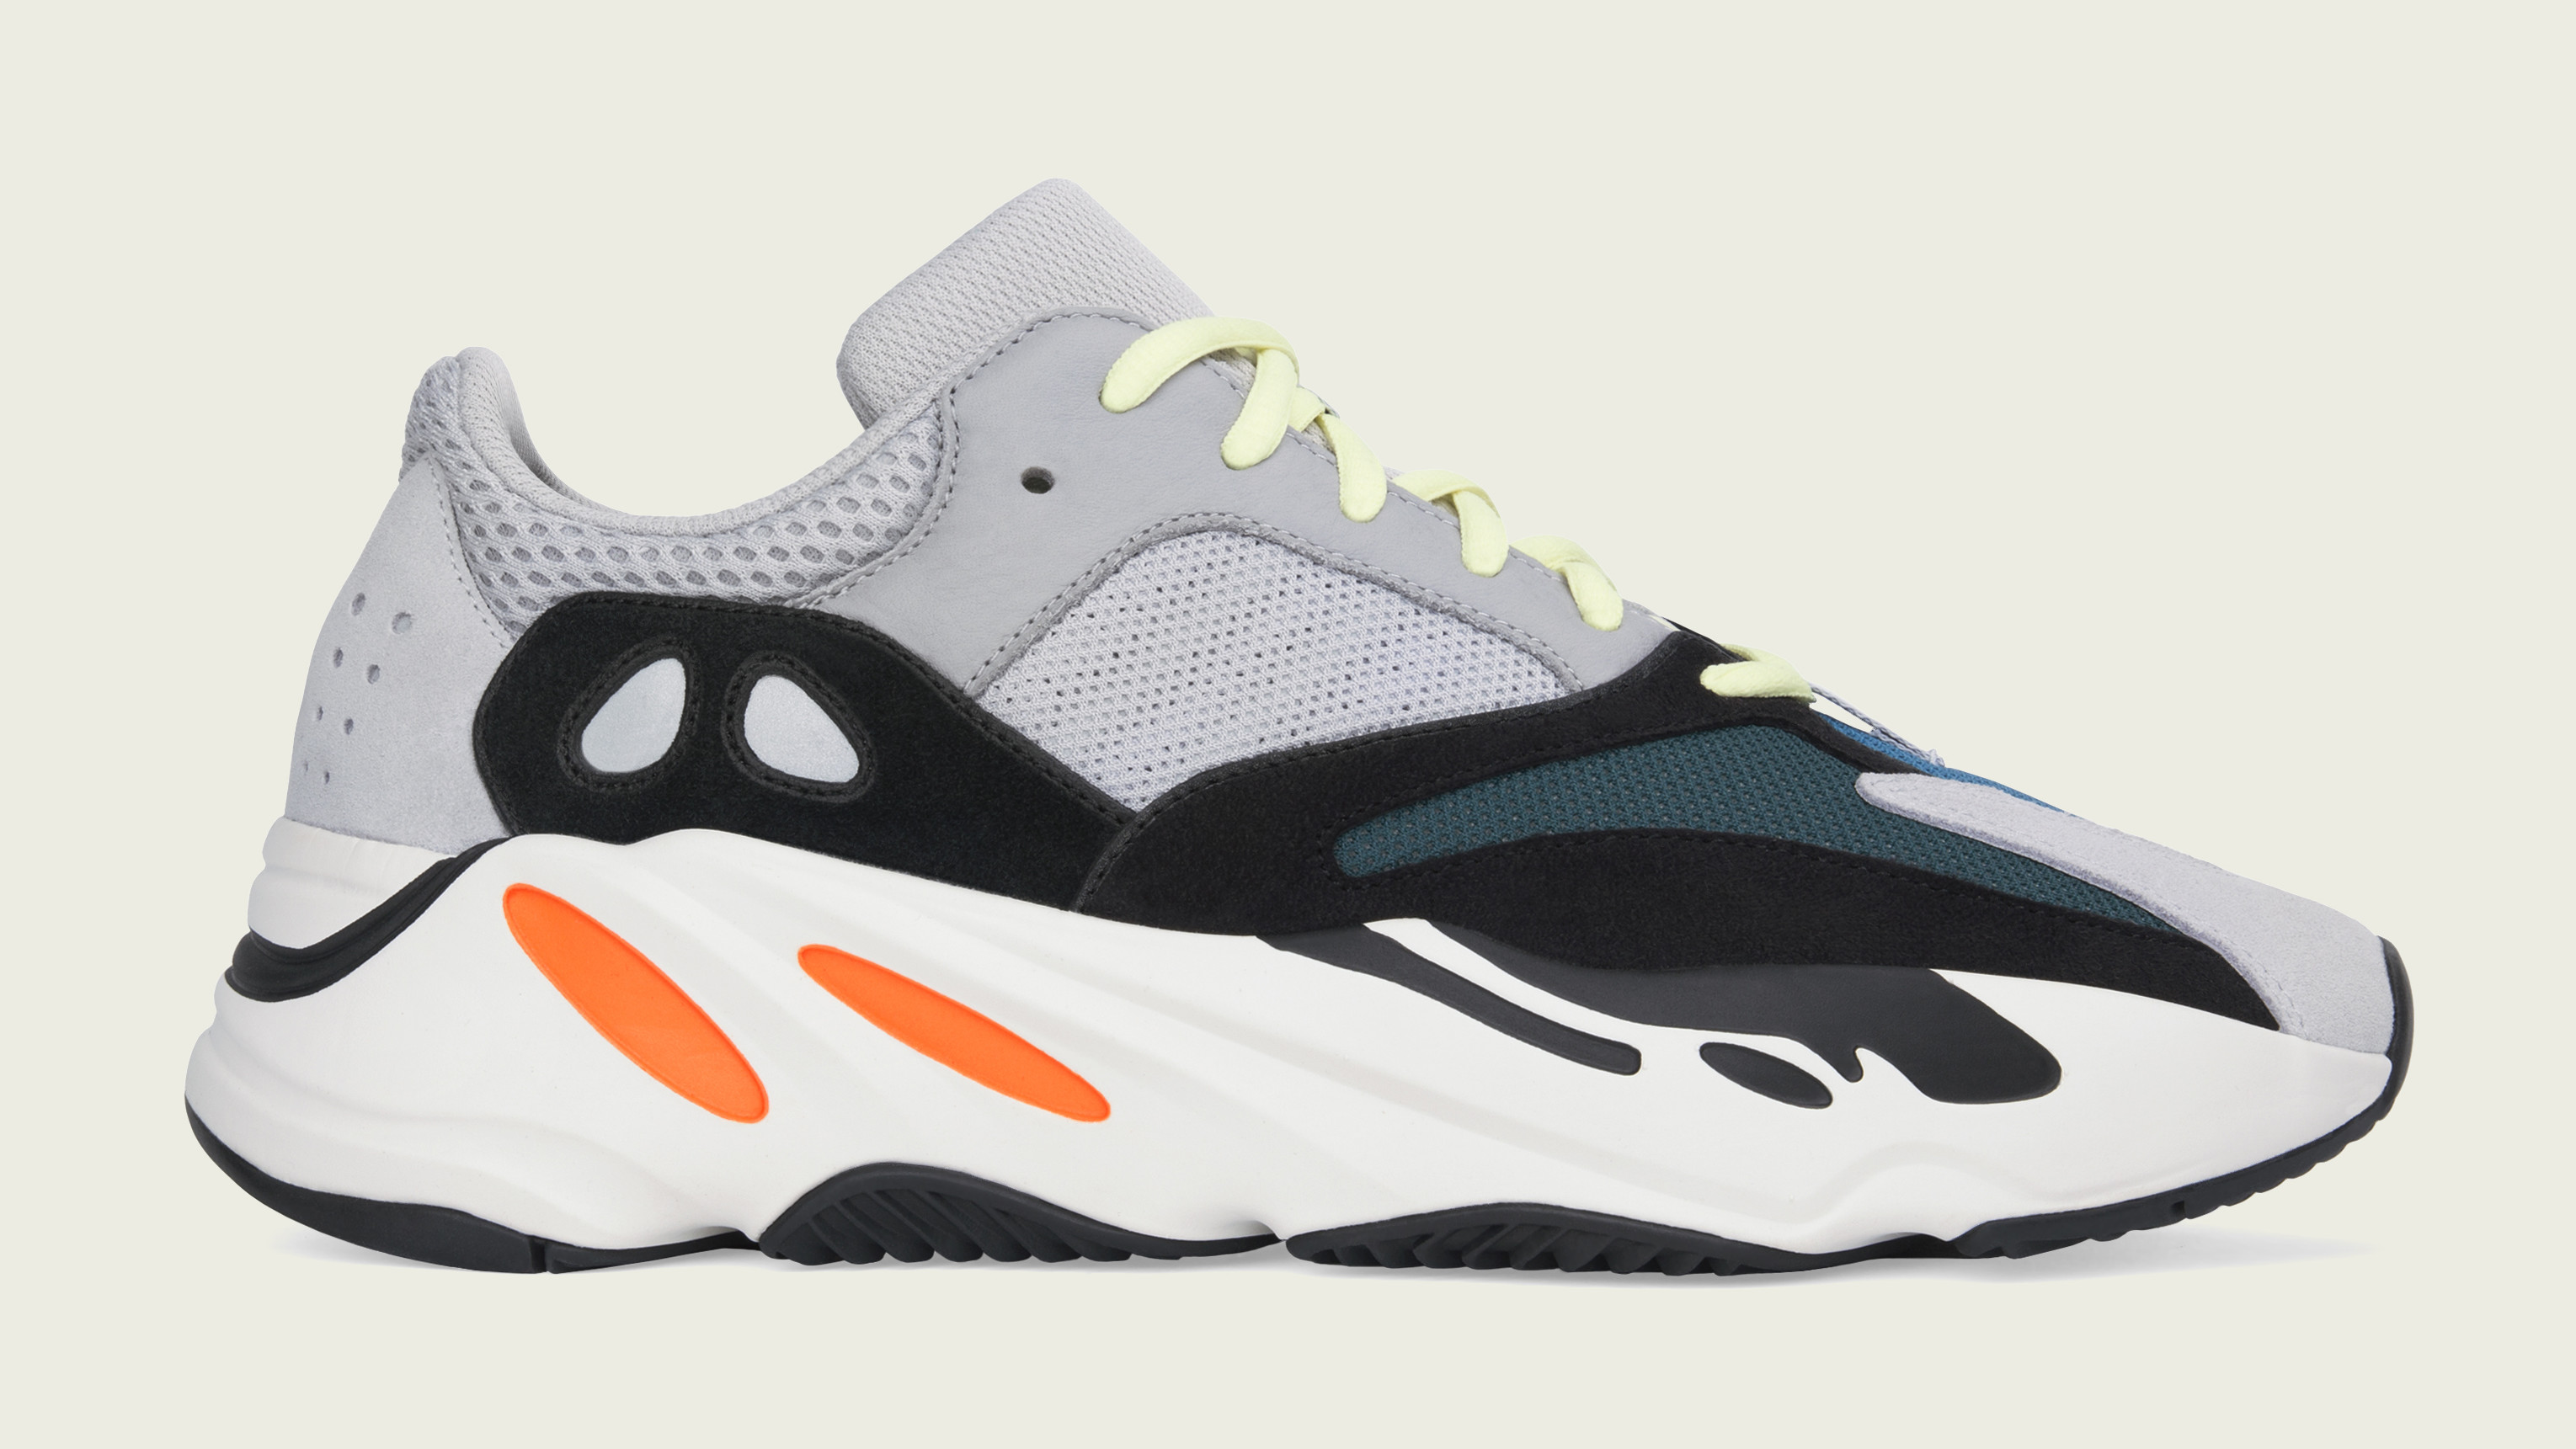 adidas yeezy boost 700 wave runner b75571 lateral